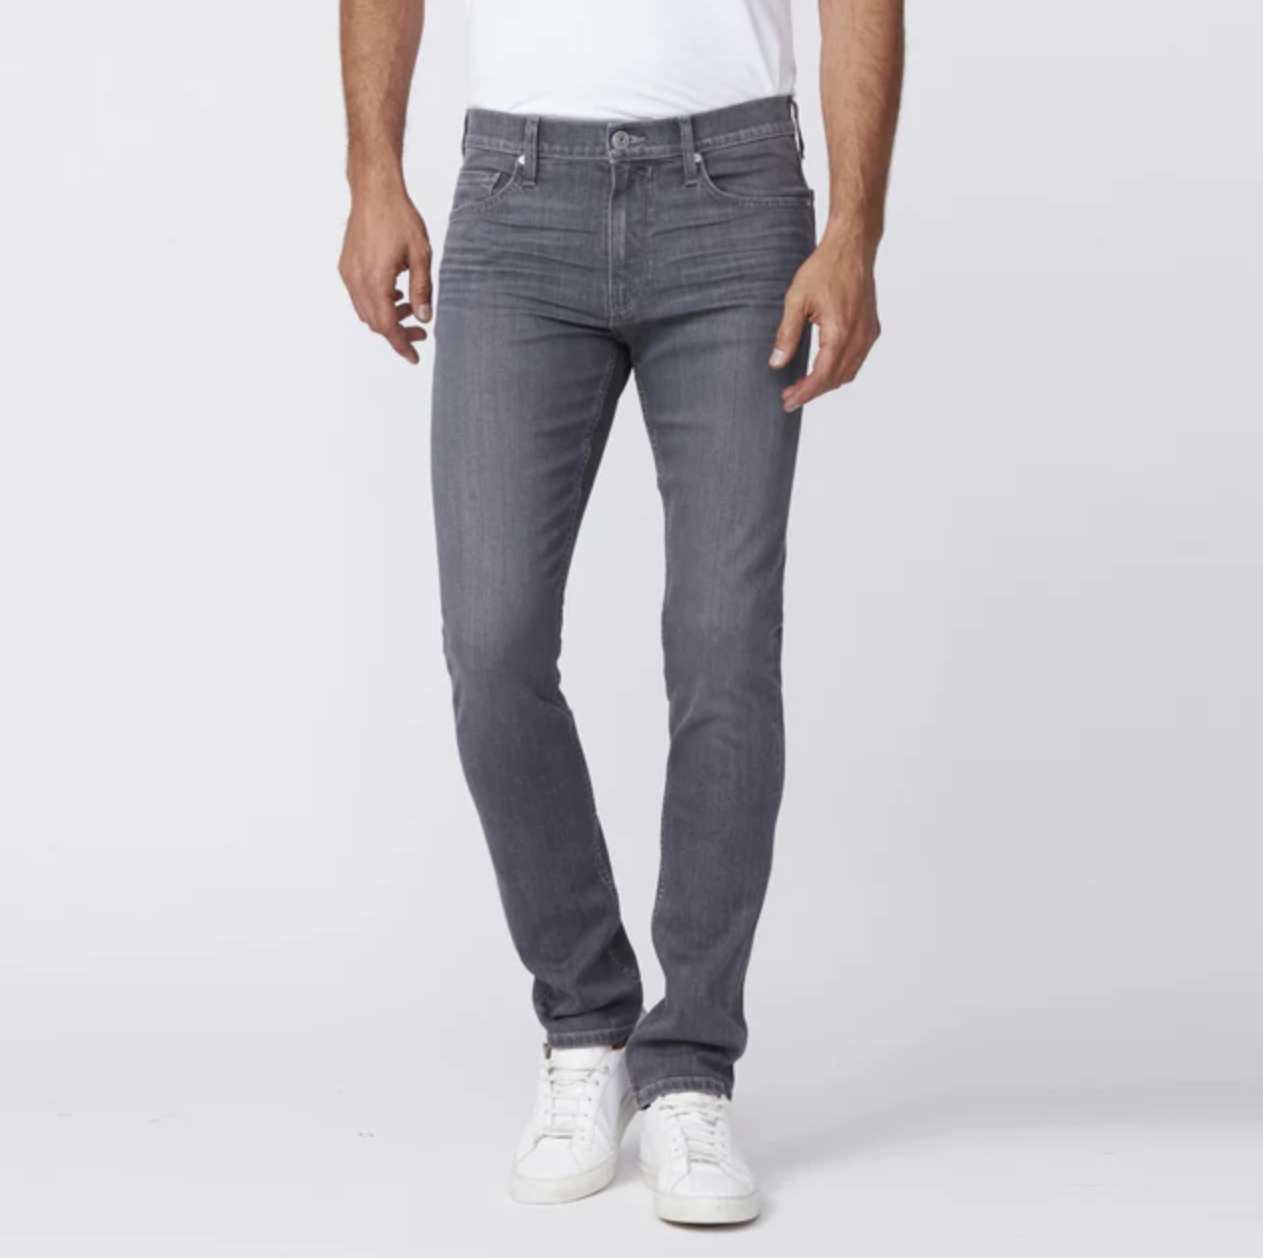 waist down front view of the lennox skinny fit jean from Paige in mickells grey